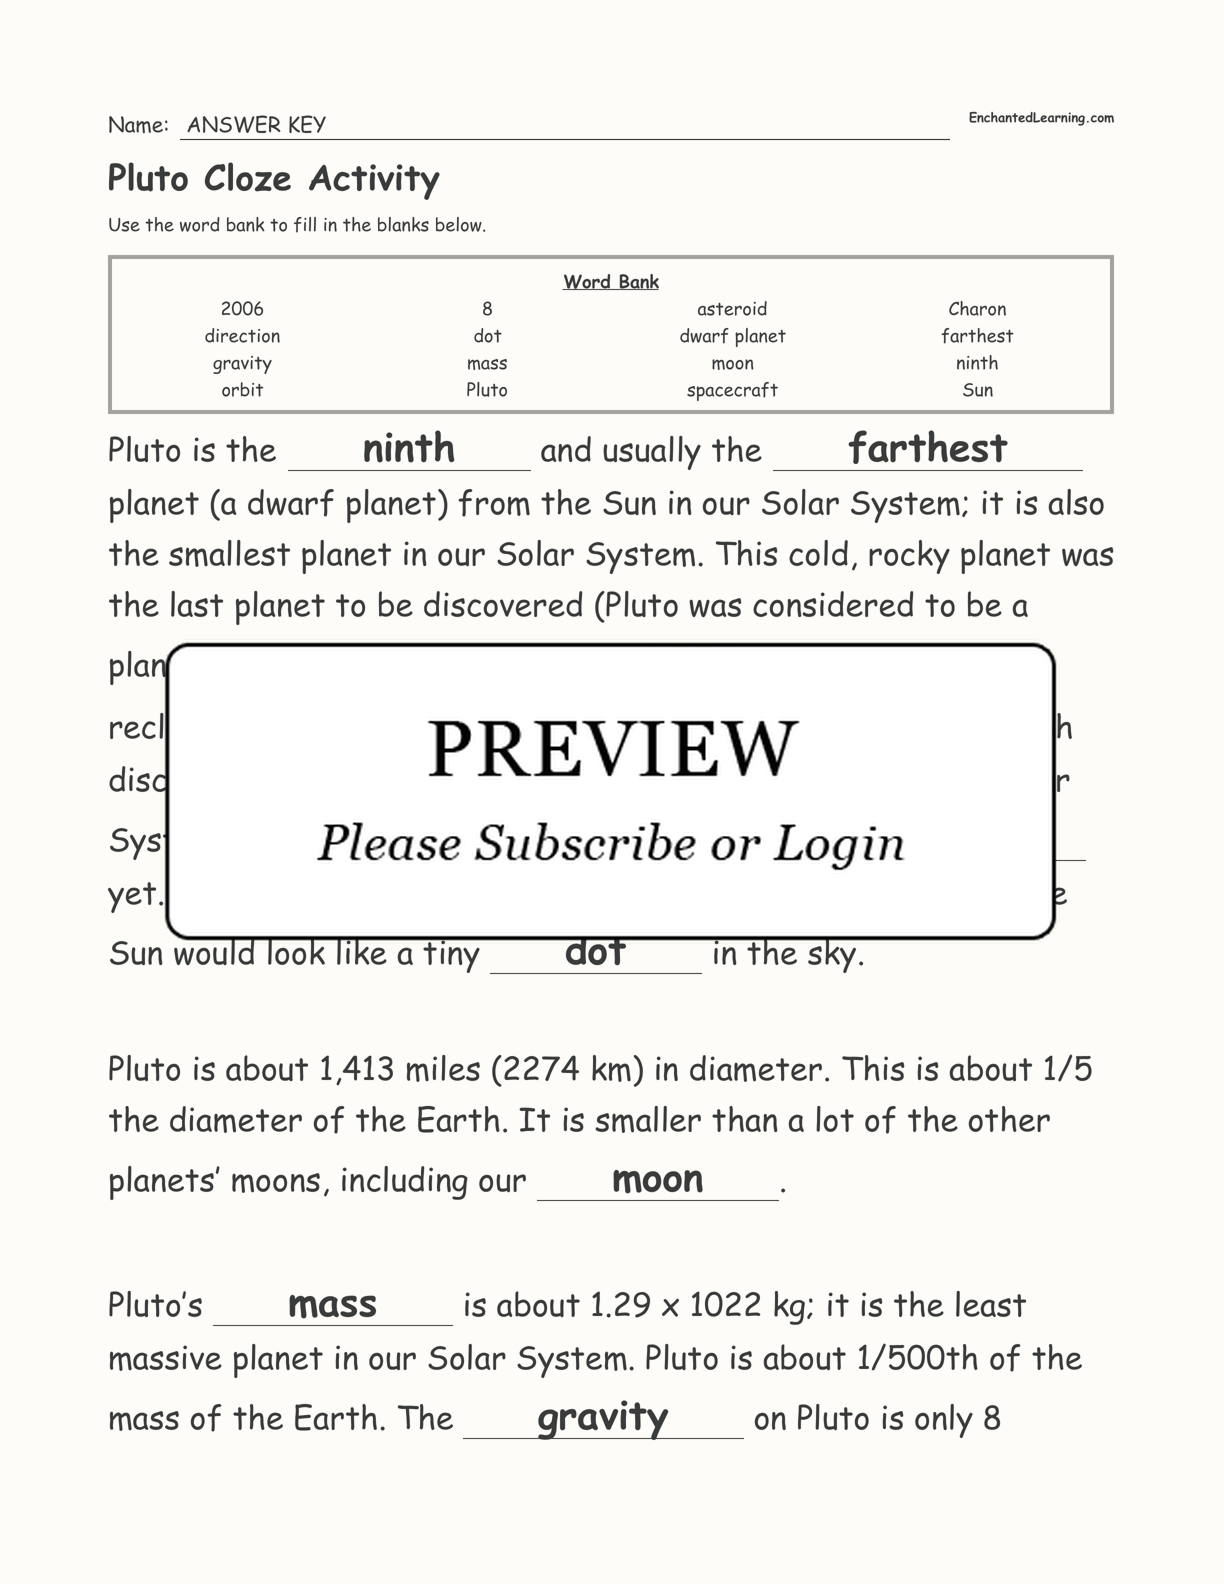 Pluto Cloze Activity interactive worksheet page 3